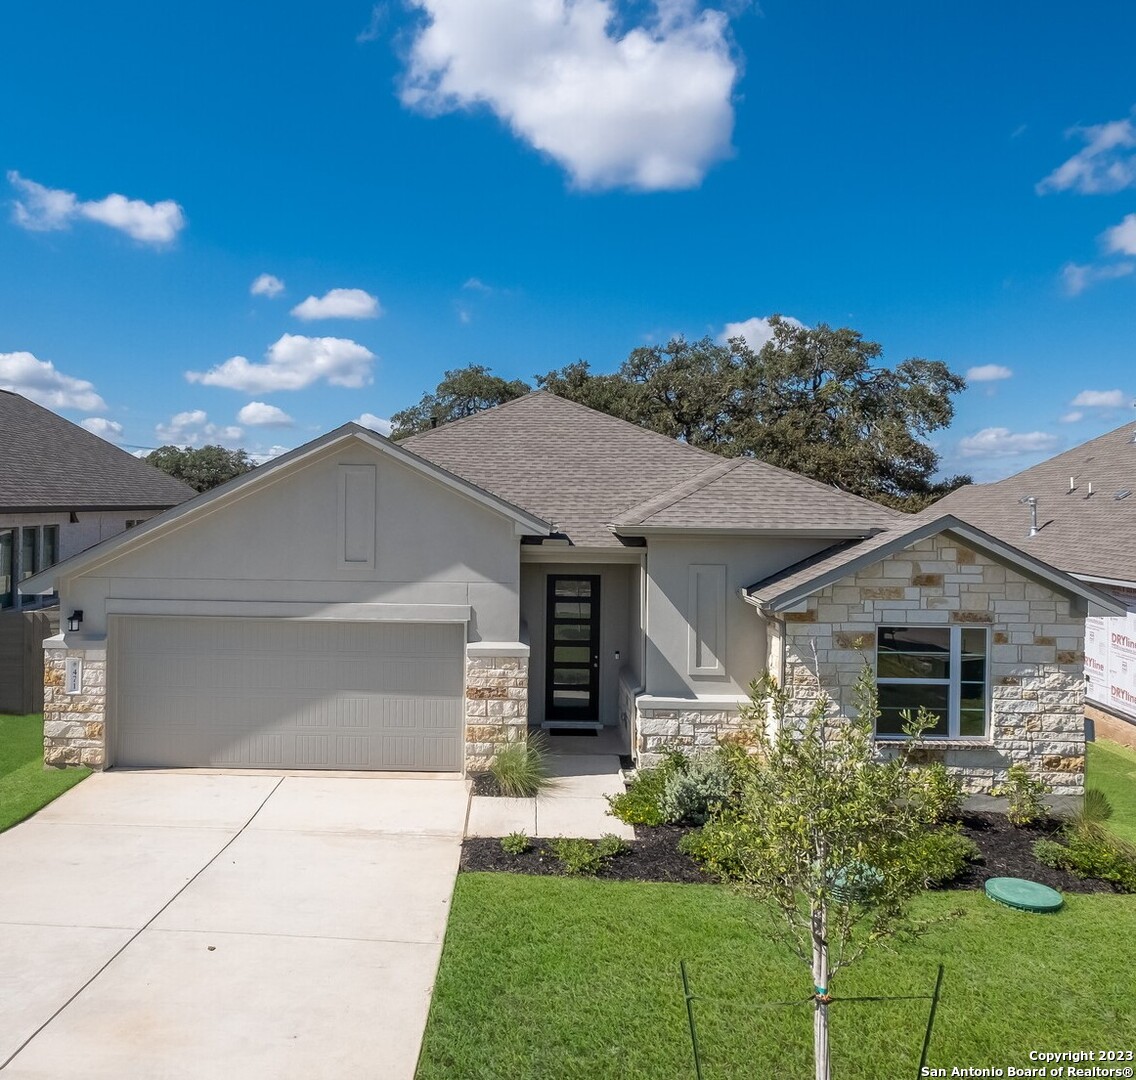 Photo of 471 Orchard Wy in New Braunfels, TX